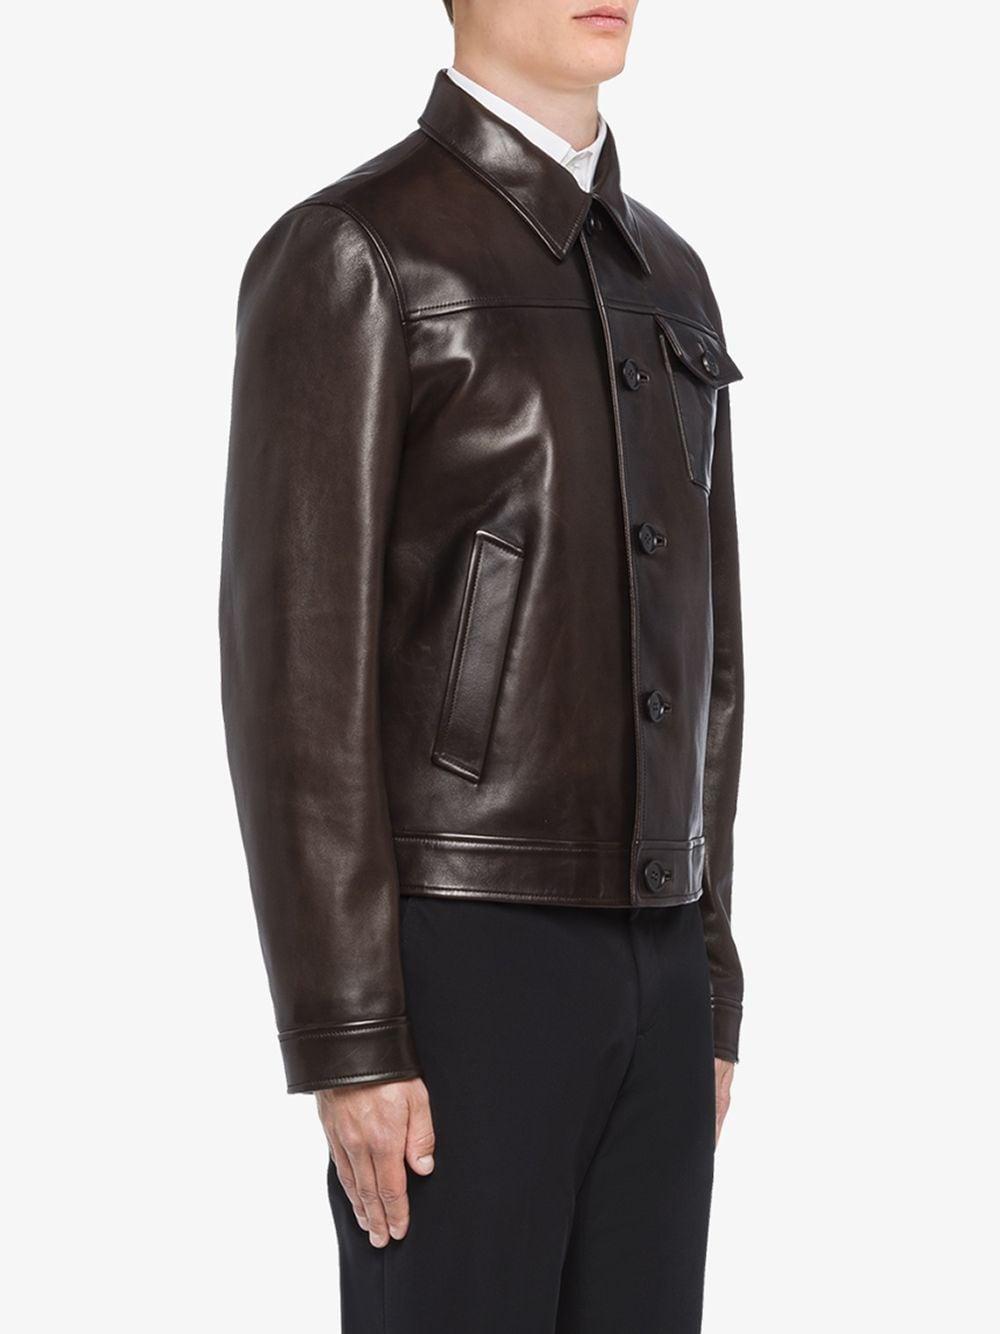 Prada Nappa Leather Jacket in Brown for Men - Lyst